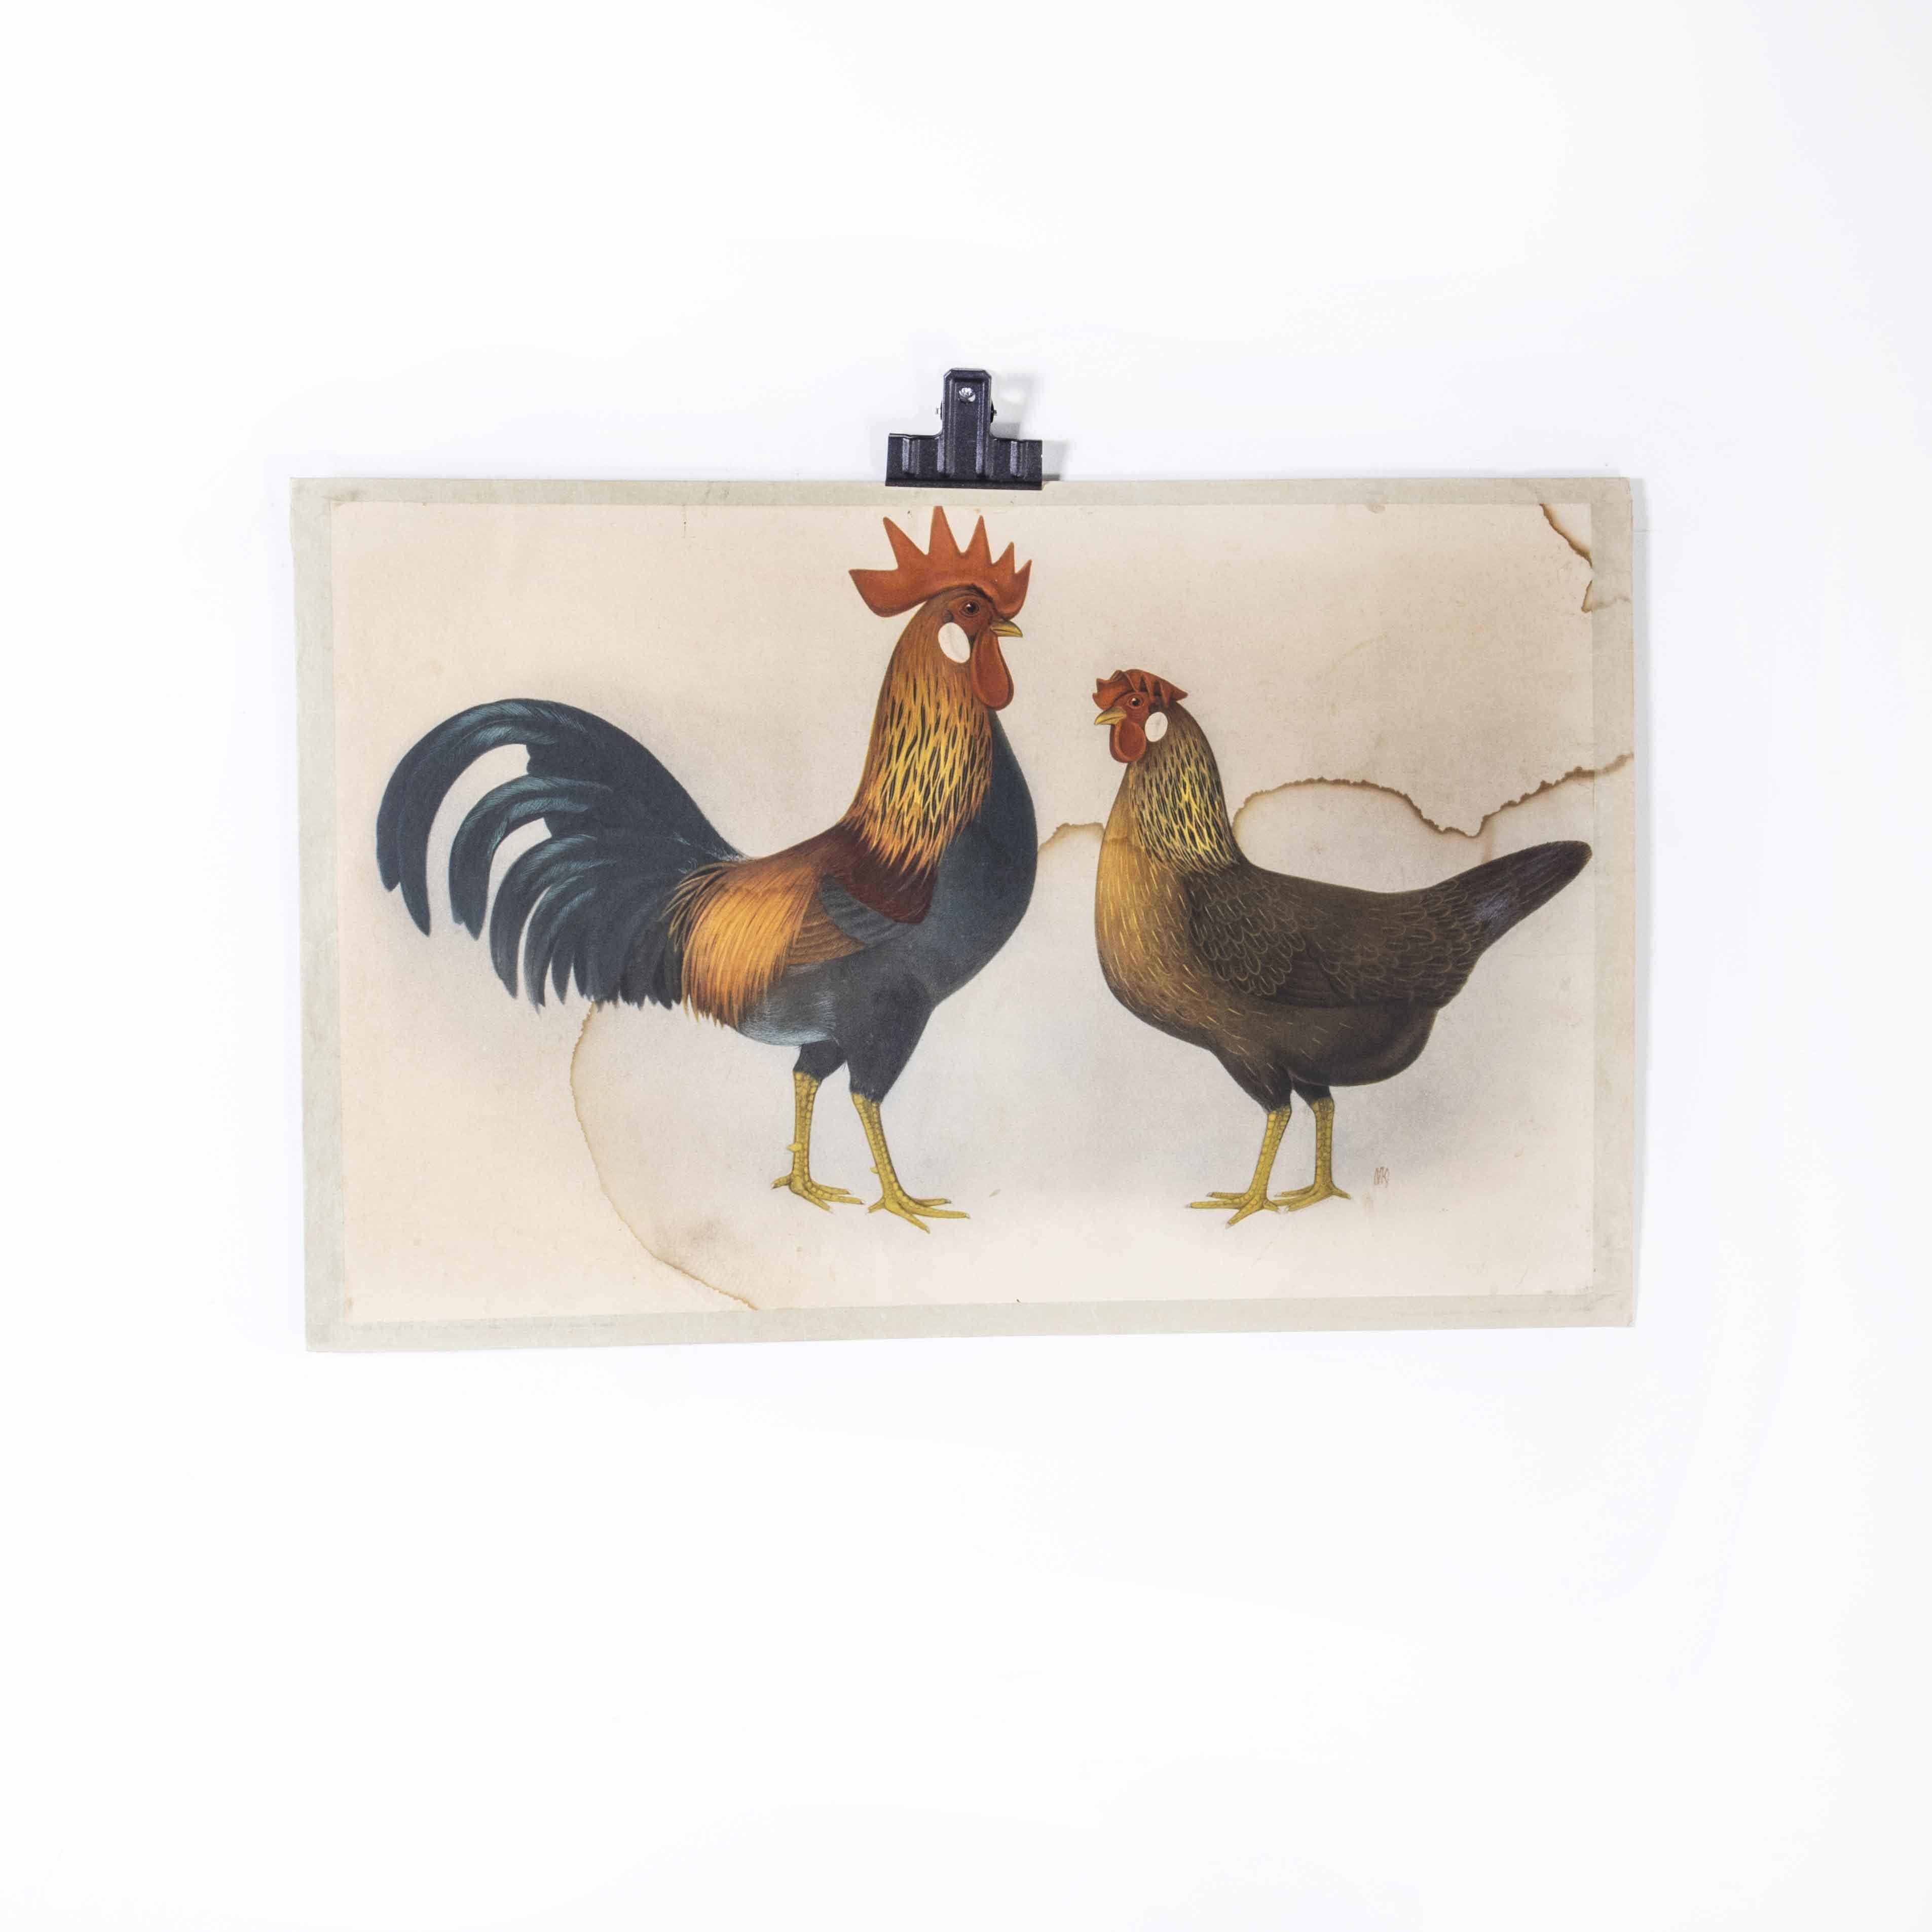 1950's Hen and Rooster Educational Poster In Good Condition For Sale In Hook, Hampshire